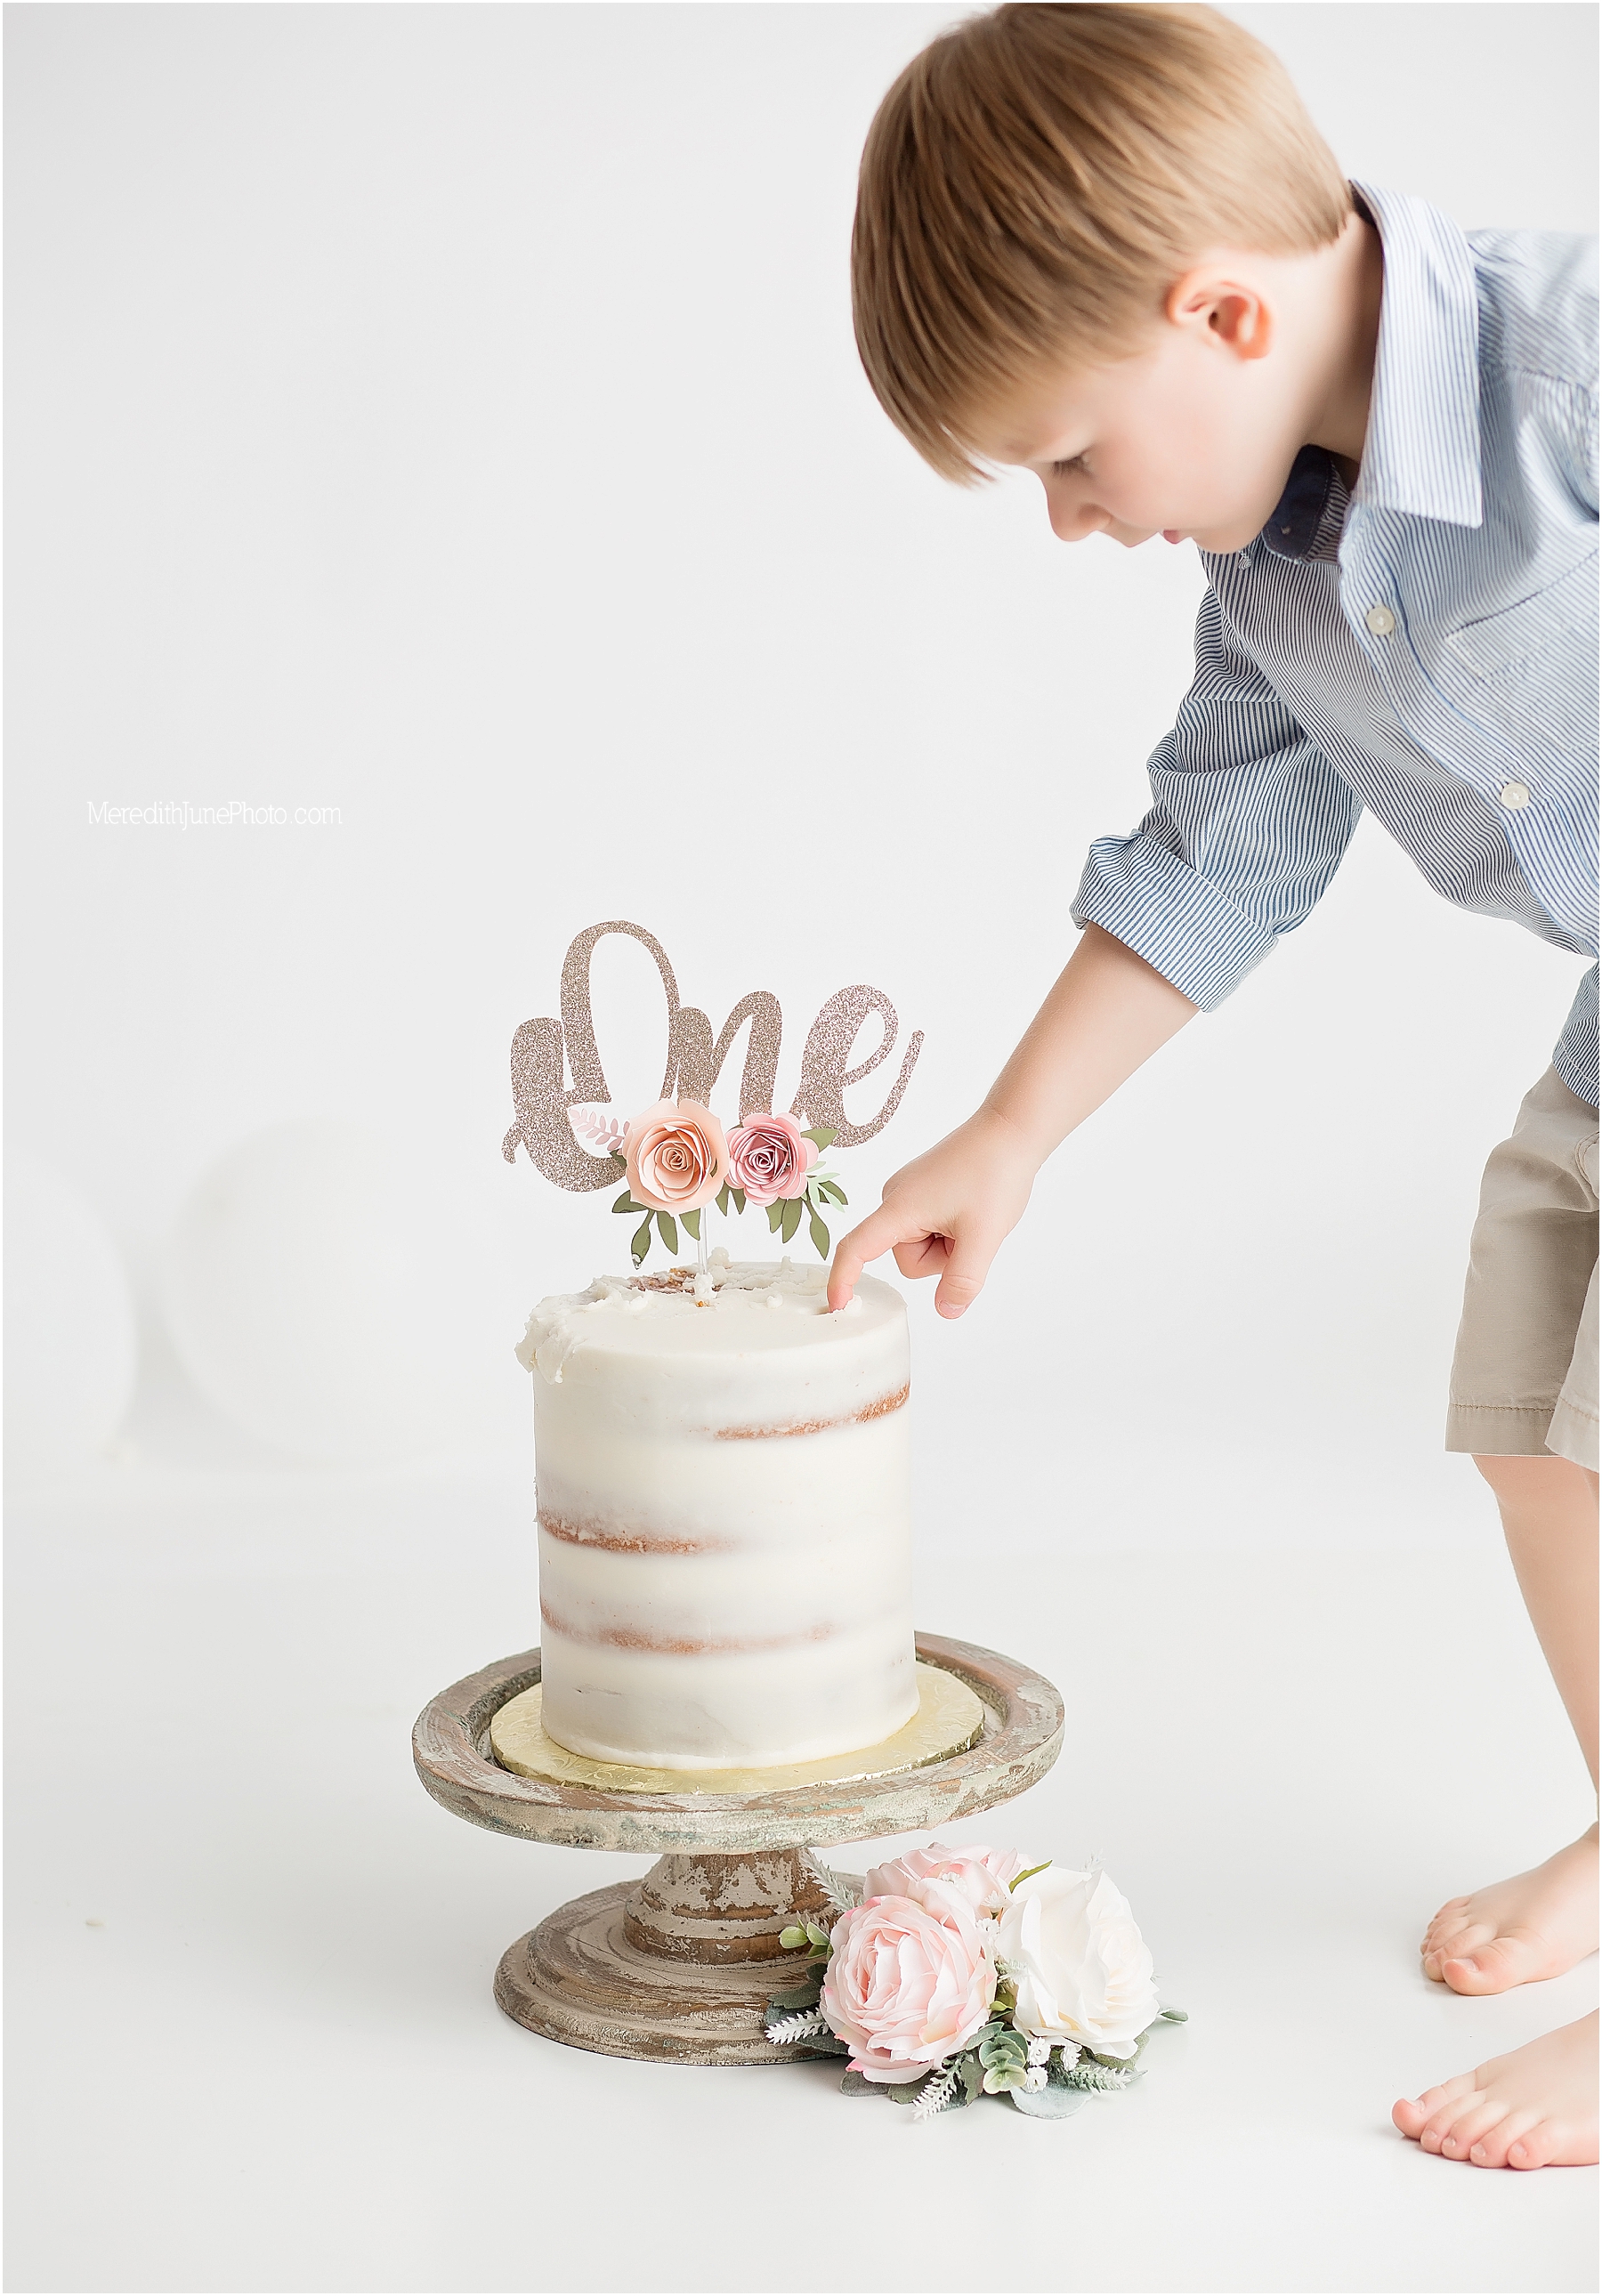 all white cake smash session for baby girl with family